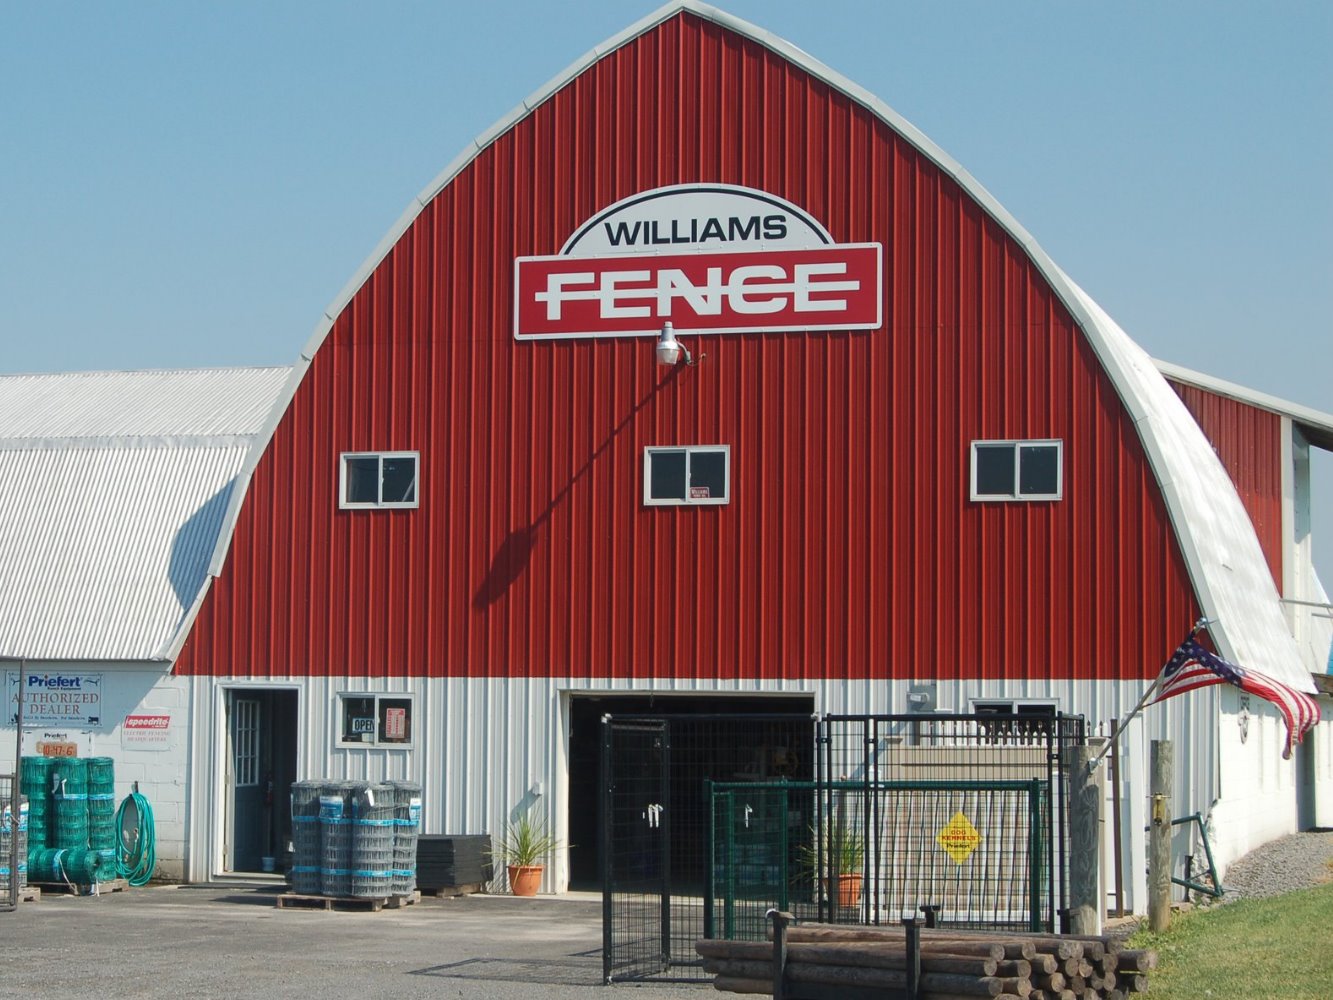 The Williams Fence Difference in Utica New York Fence Installations